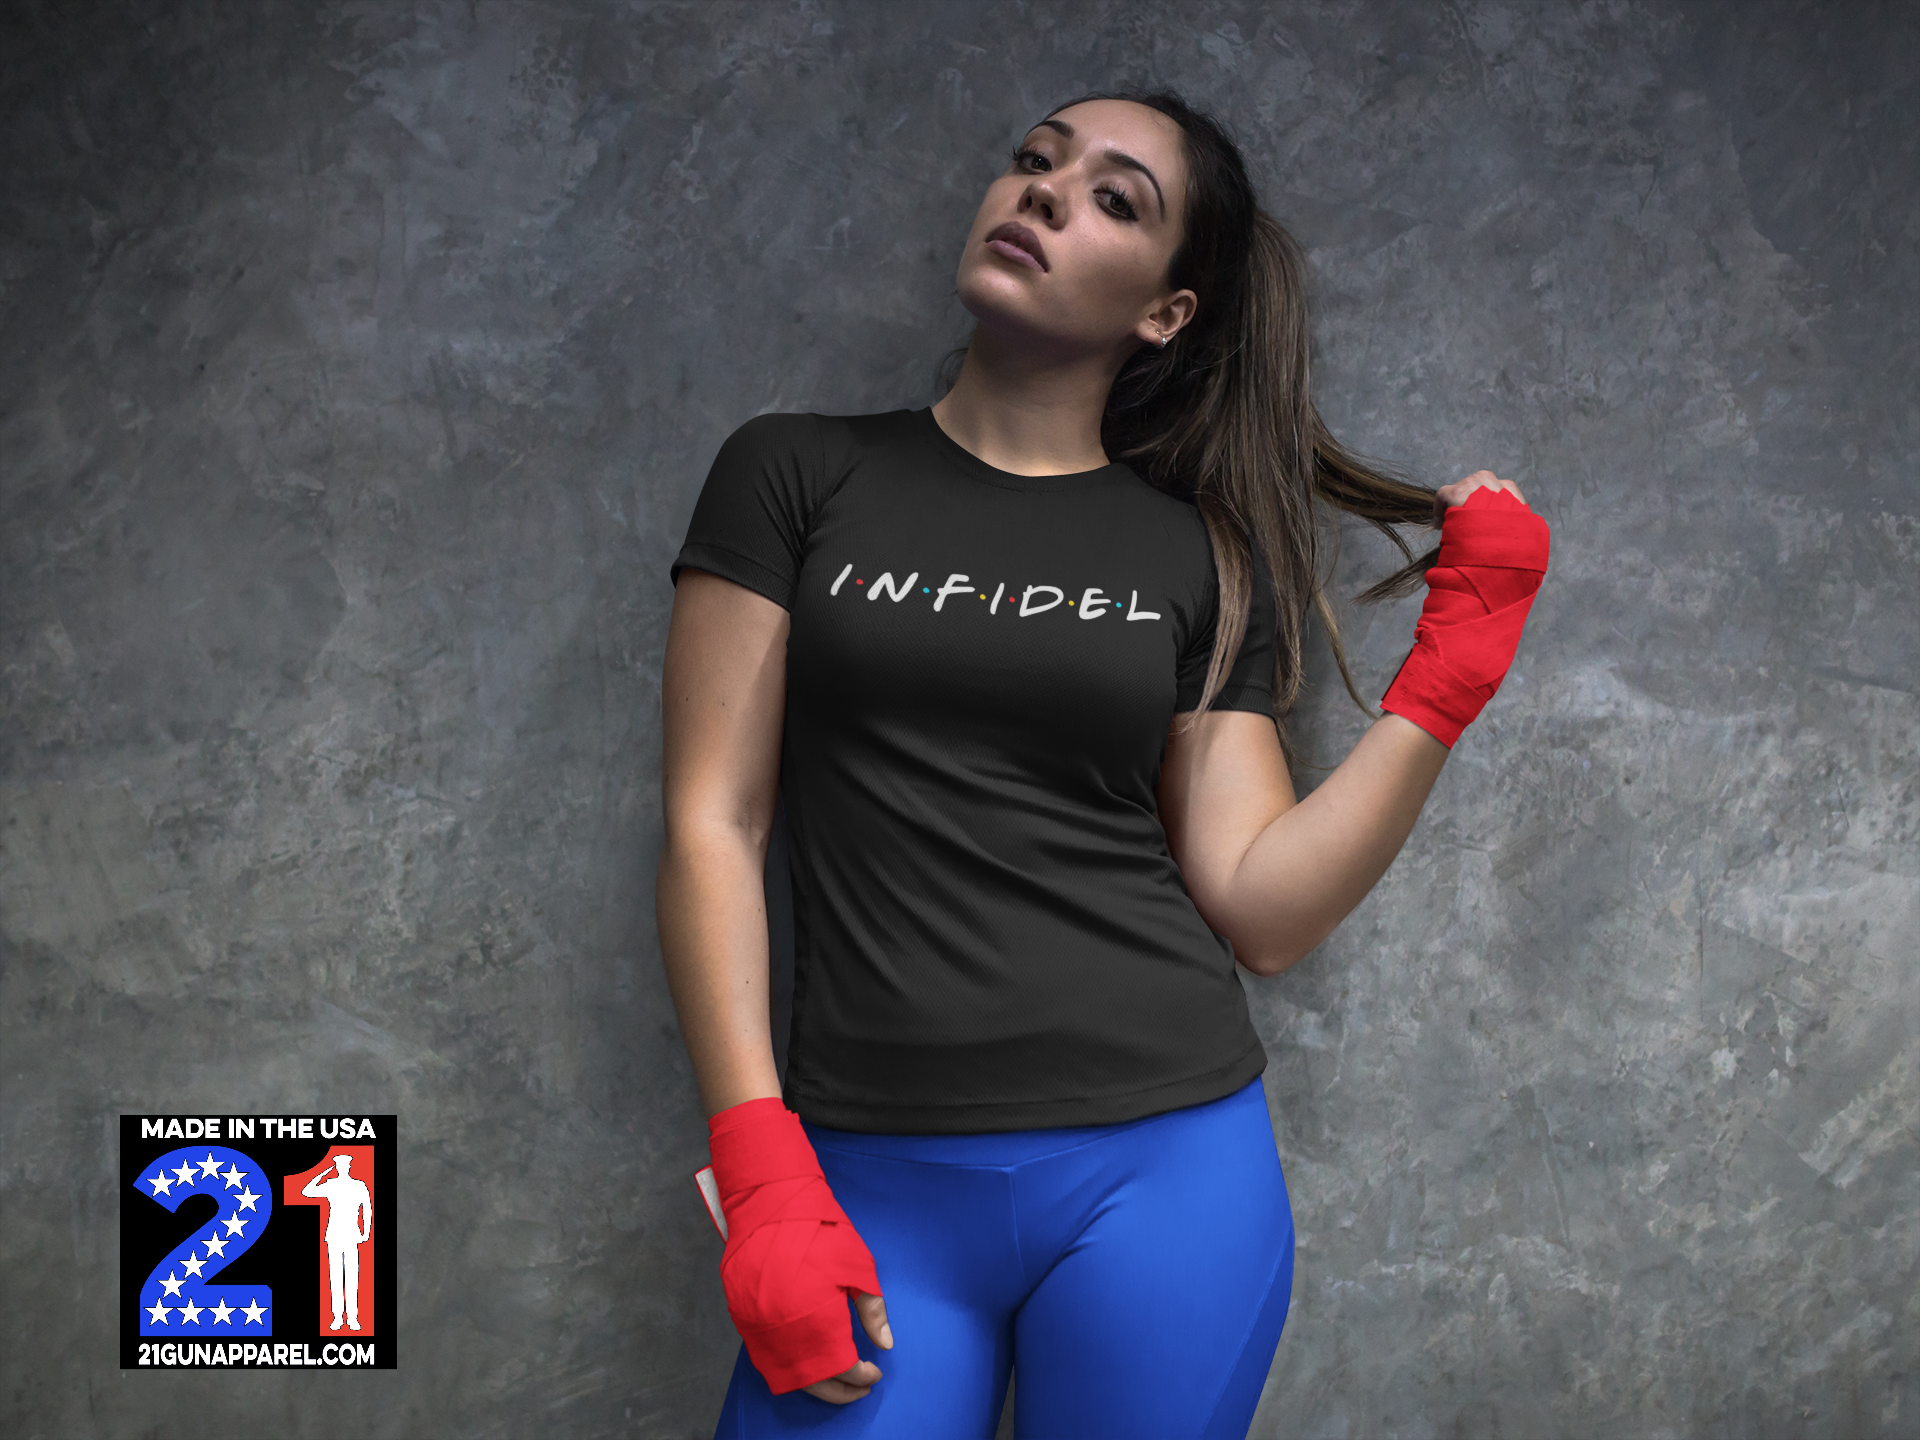 The One With The Infidel T-shirt Ladies Crew Neck Short Sleeve